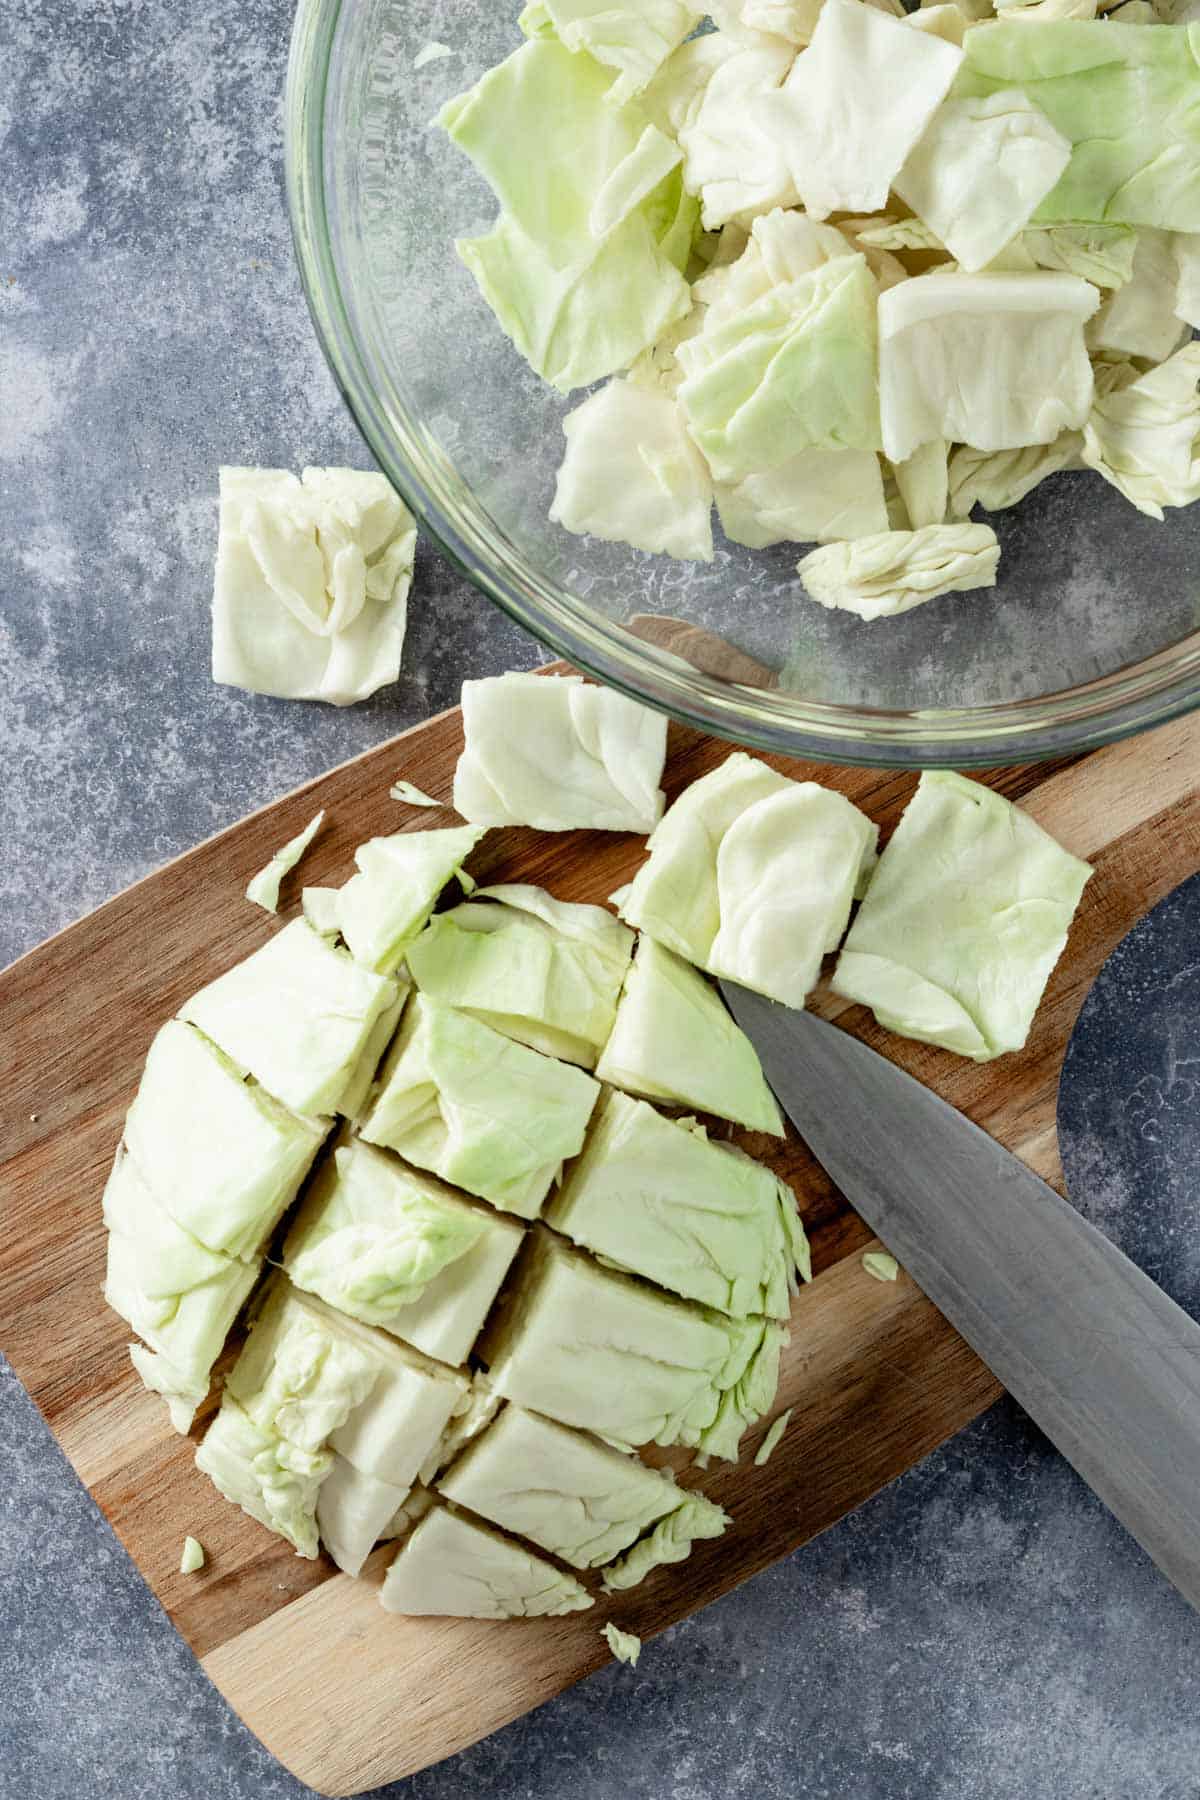 slicing the cabbage on a cutting board.